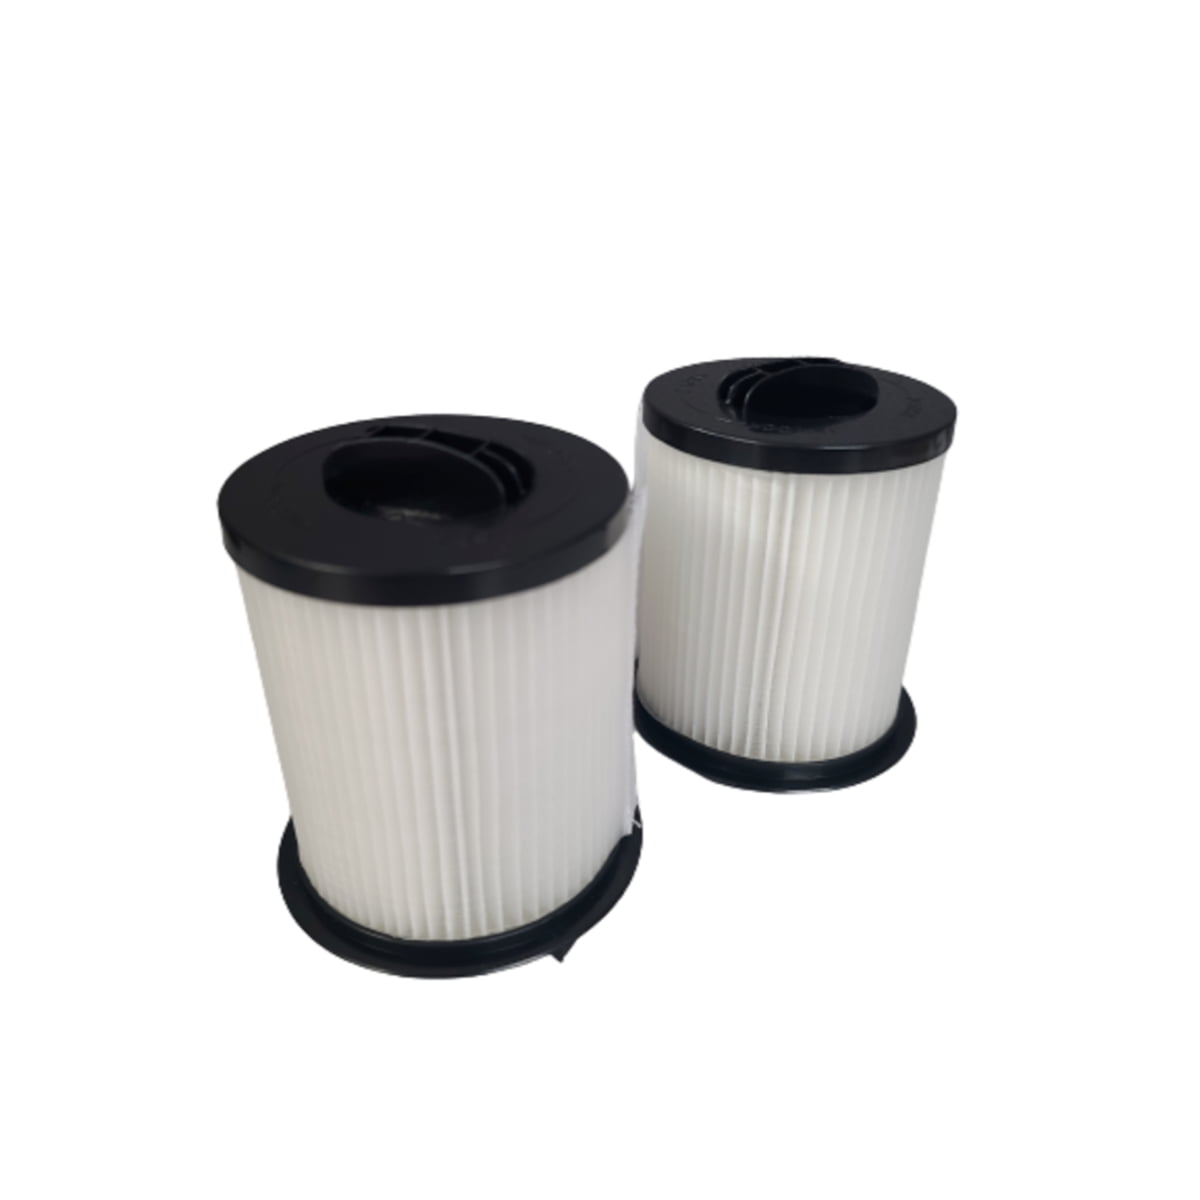 ACPST20702 ST2500R ST2000 Multi-Level Filtration ST2010 Ovente Premium HEPA Filter Replacement for Vacuum and ST2510R Series 